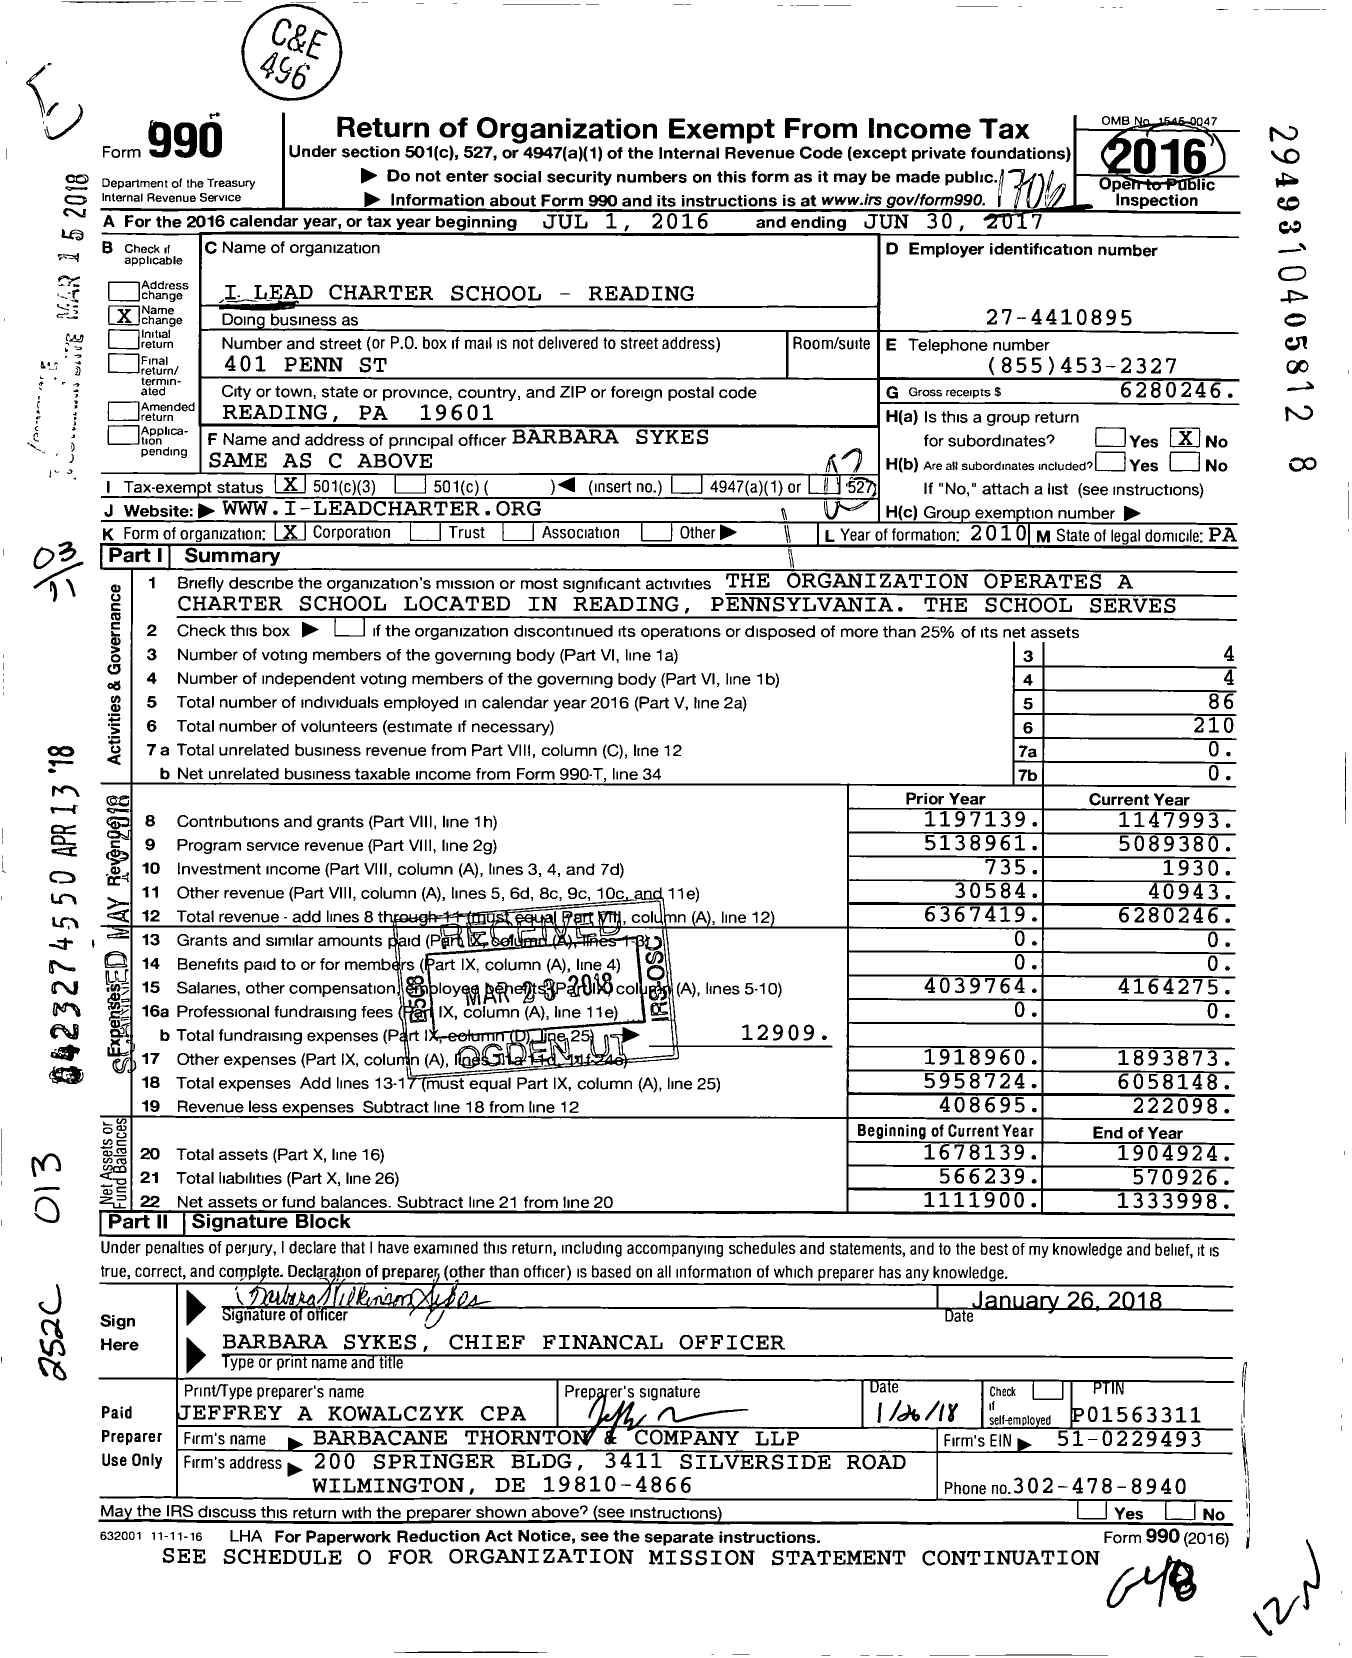 Image of first page of 2016 Form 990 for I-Lead Charter School